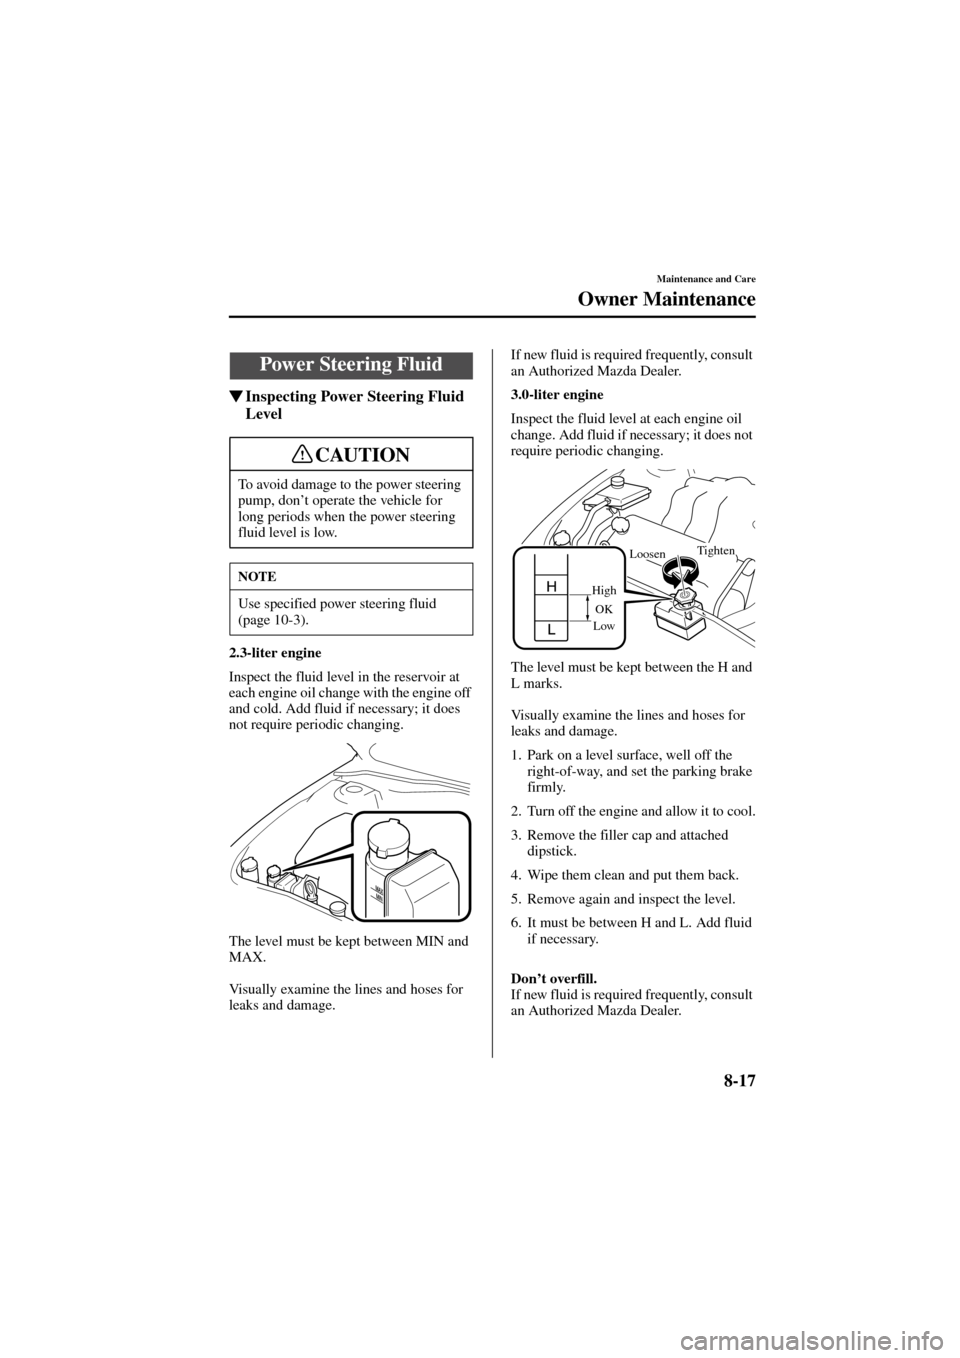 MAZDA MODEL 6 2004  Owners Manual (in English) 8-17
Maintenance and Care
Owner Maintenance
Form No. 8R29-EA-02I
Inspecting Power Steering Fluid 
Level
2.3-liter engine
Inspect the fluid level in the reservoir at 
each engine oil change with the e